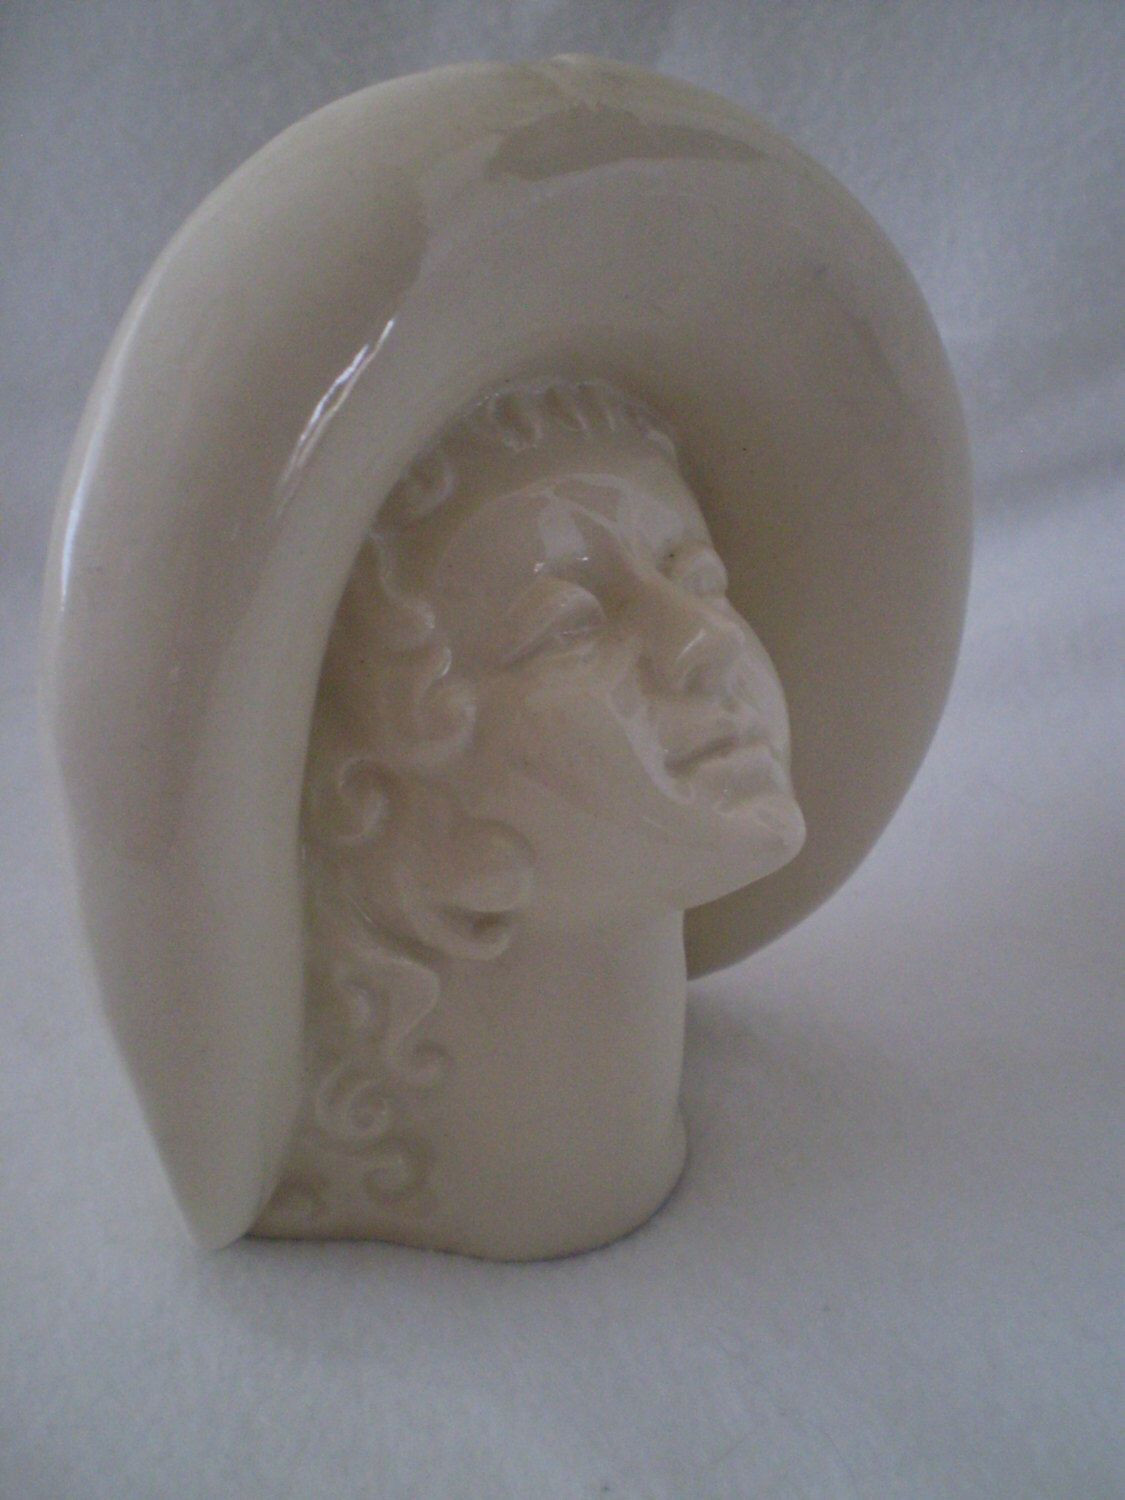 12 Fabulous Head Vases for Sale 2024 free download head vases for sale of vintage art deco ivory lady head vase by bizzard on etsy https www throughout vintage art deco ivory lady head vase by bizzard on etsy https www